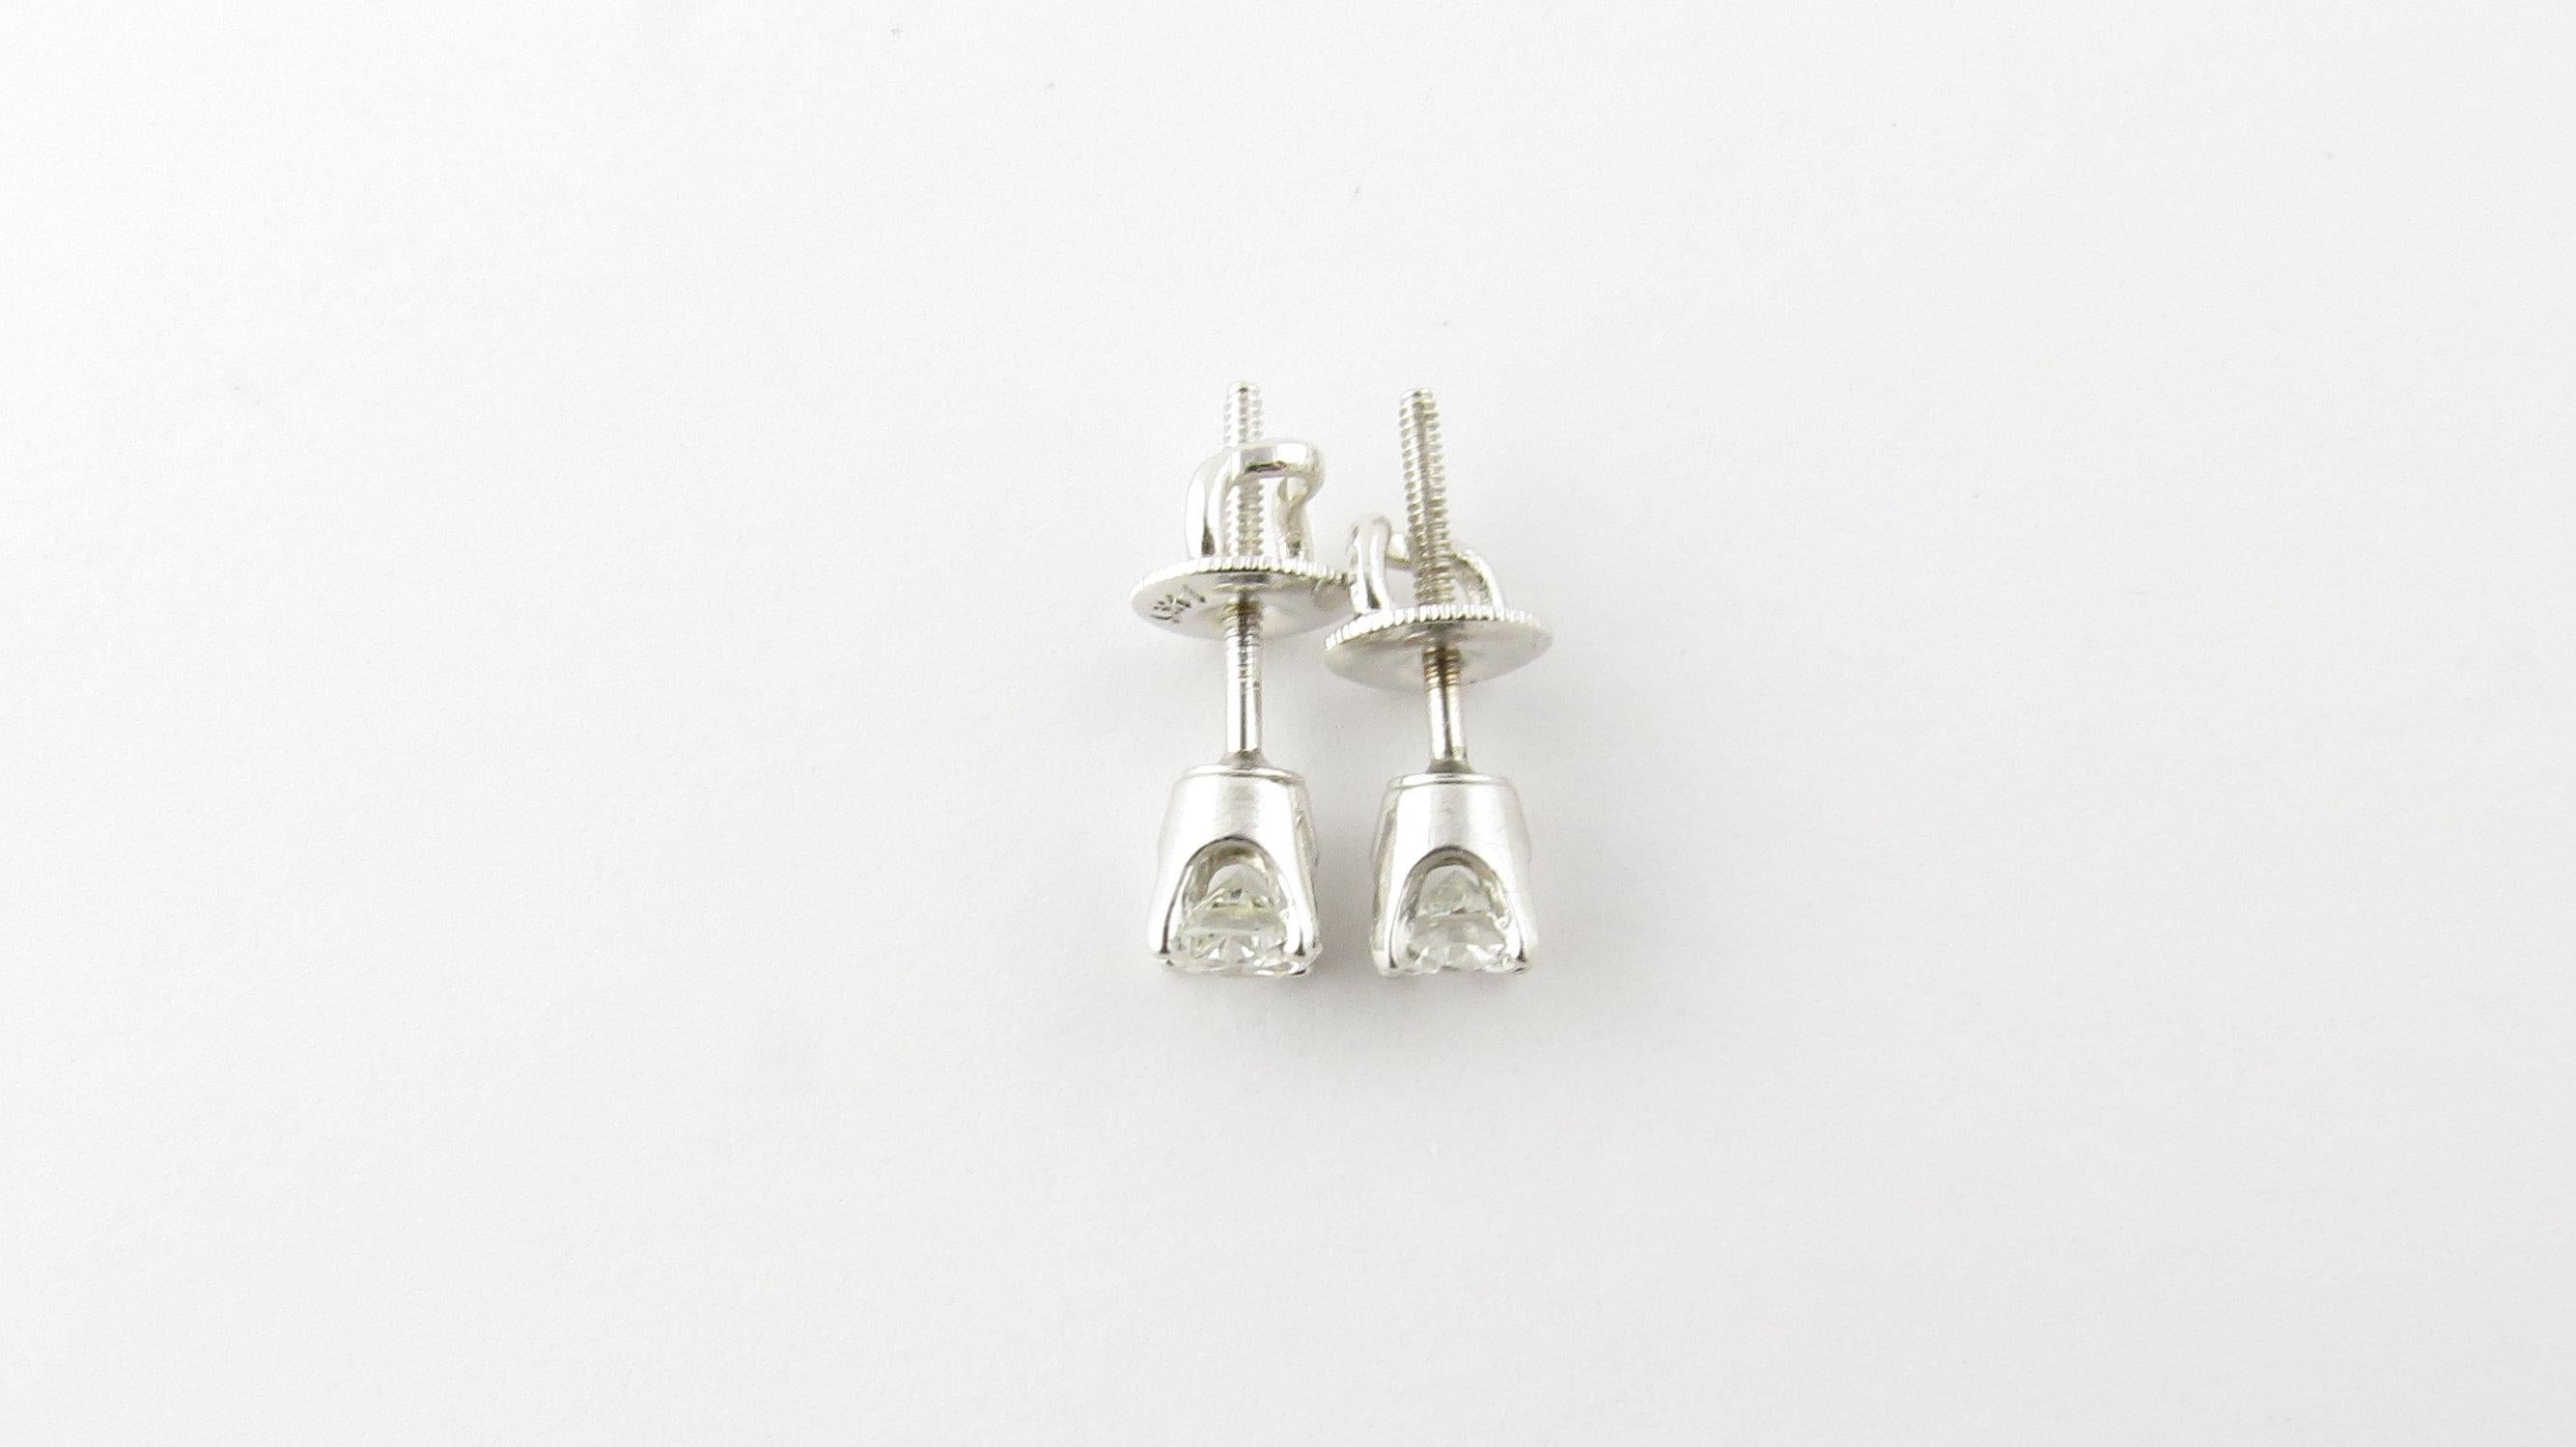 Vintage 14 Karat White Gold Diamond Stud Earrings .50 ct. twt.- These sparkling stud earrings each feature one round brilliant cut diamond set in classic 14K white gold. Screw back closures. Approximate total diamond weight: .50 ct. Diamond color: G